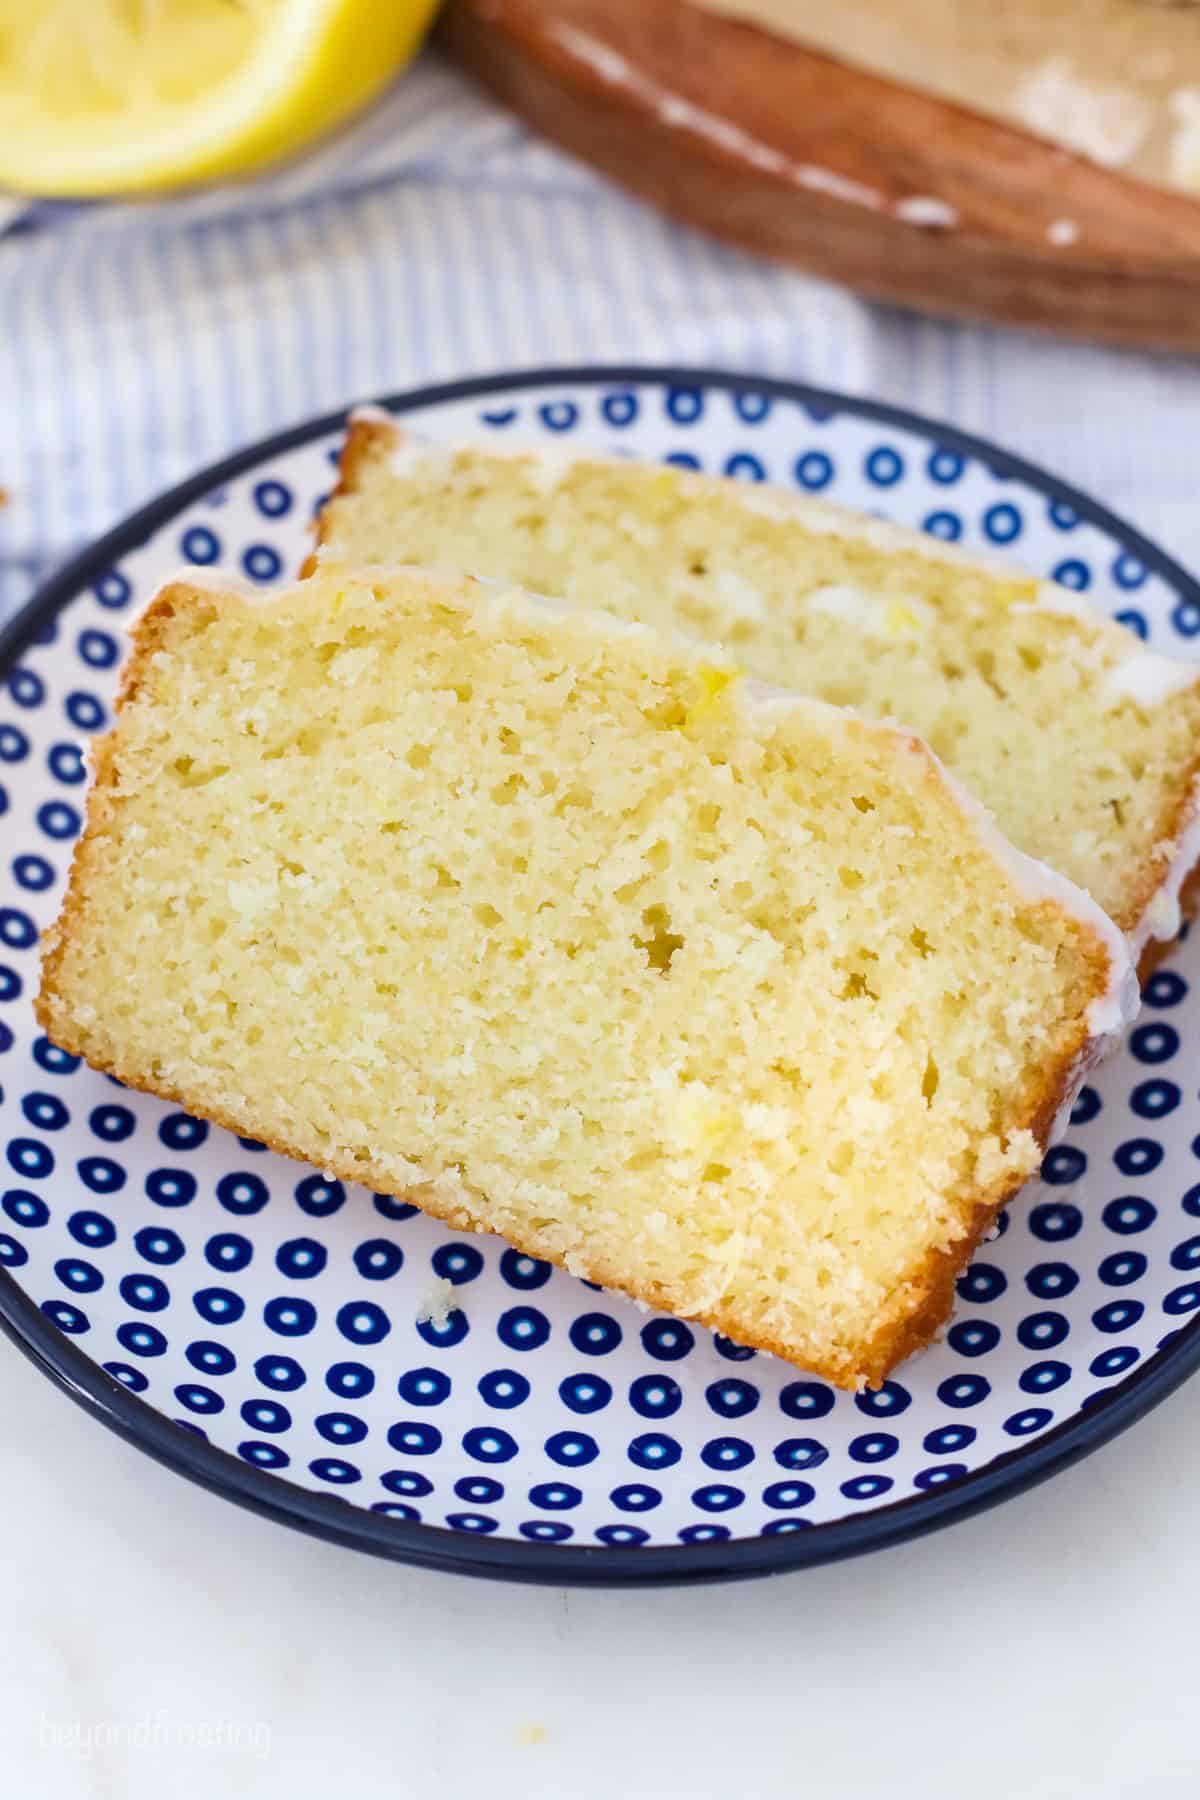 Lemon bread slices on a blue dotted plate.